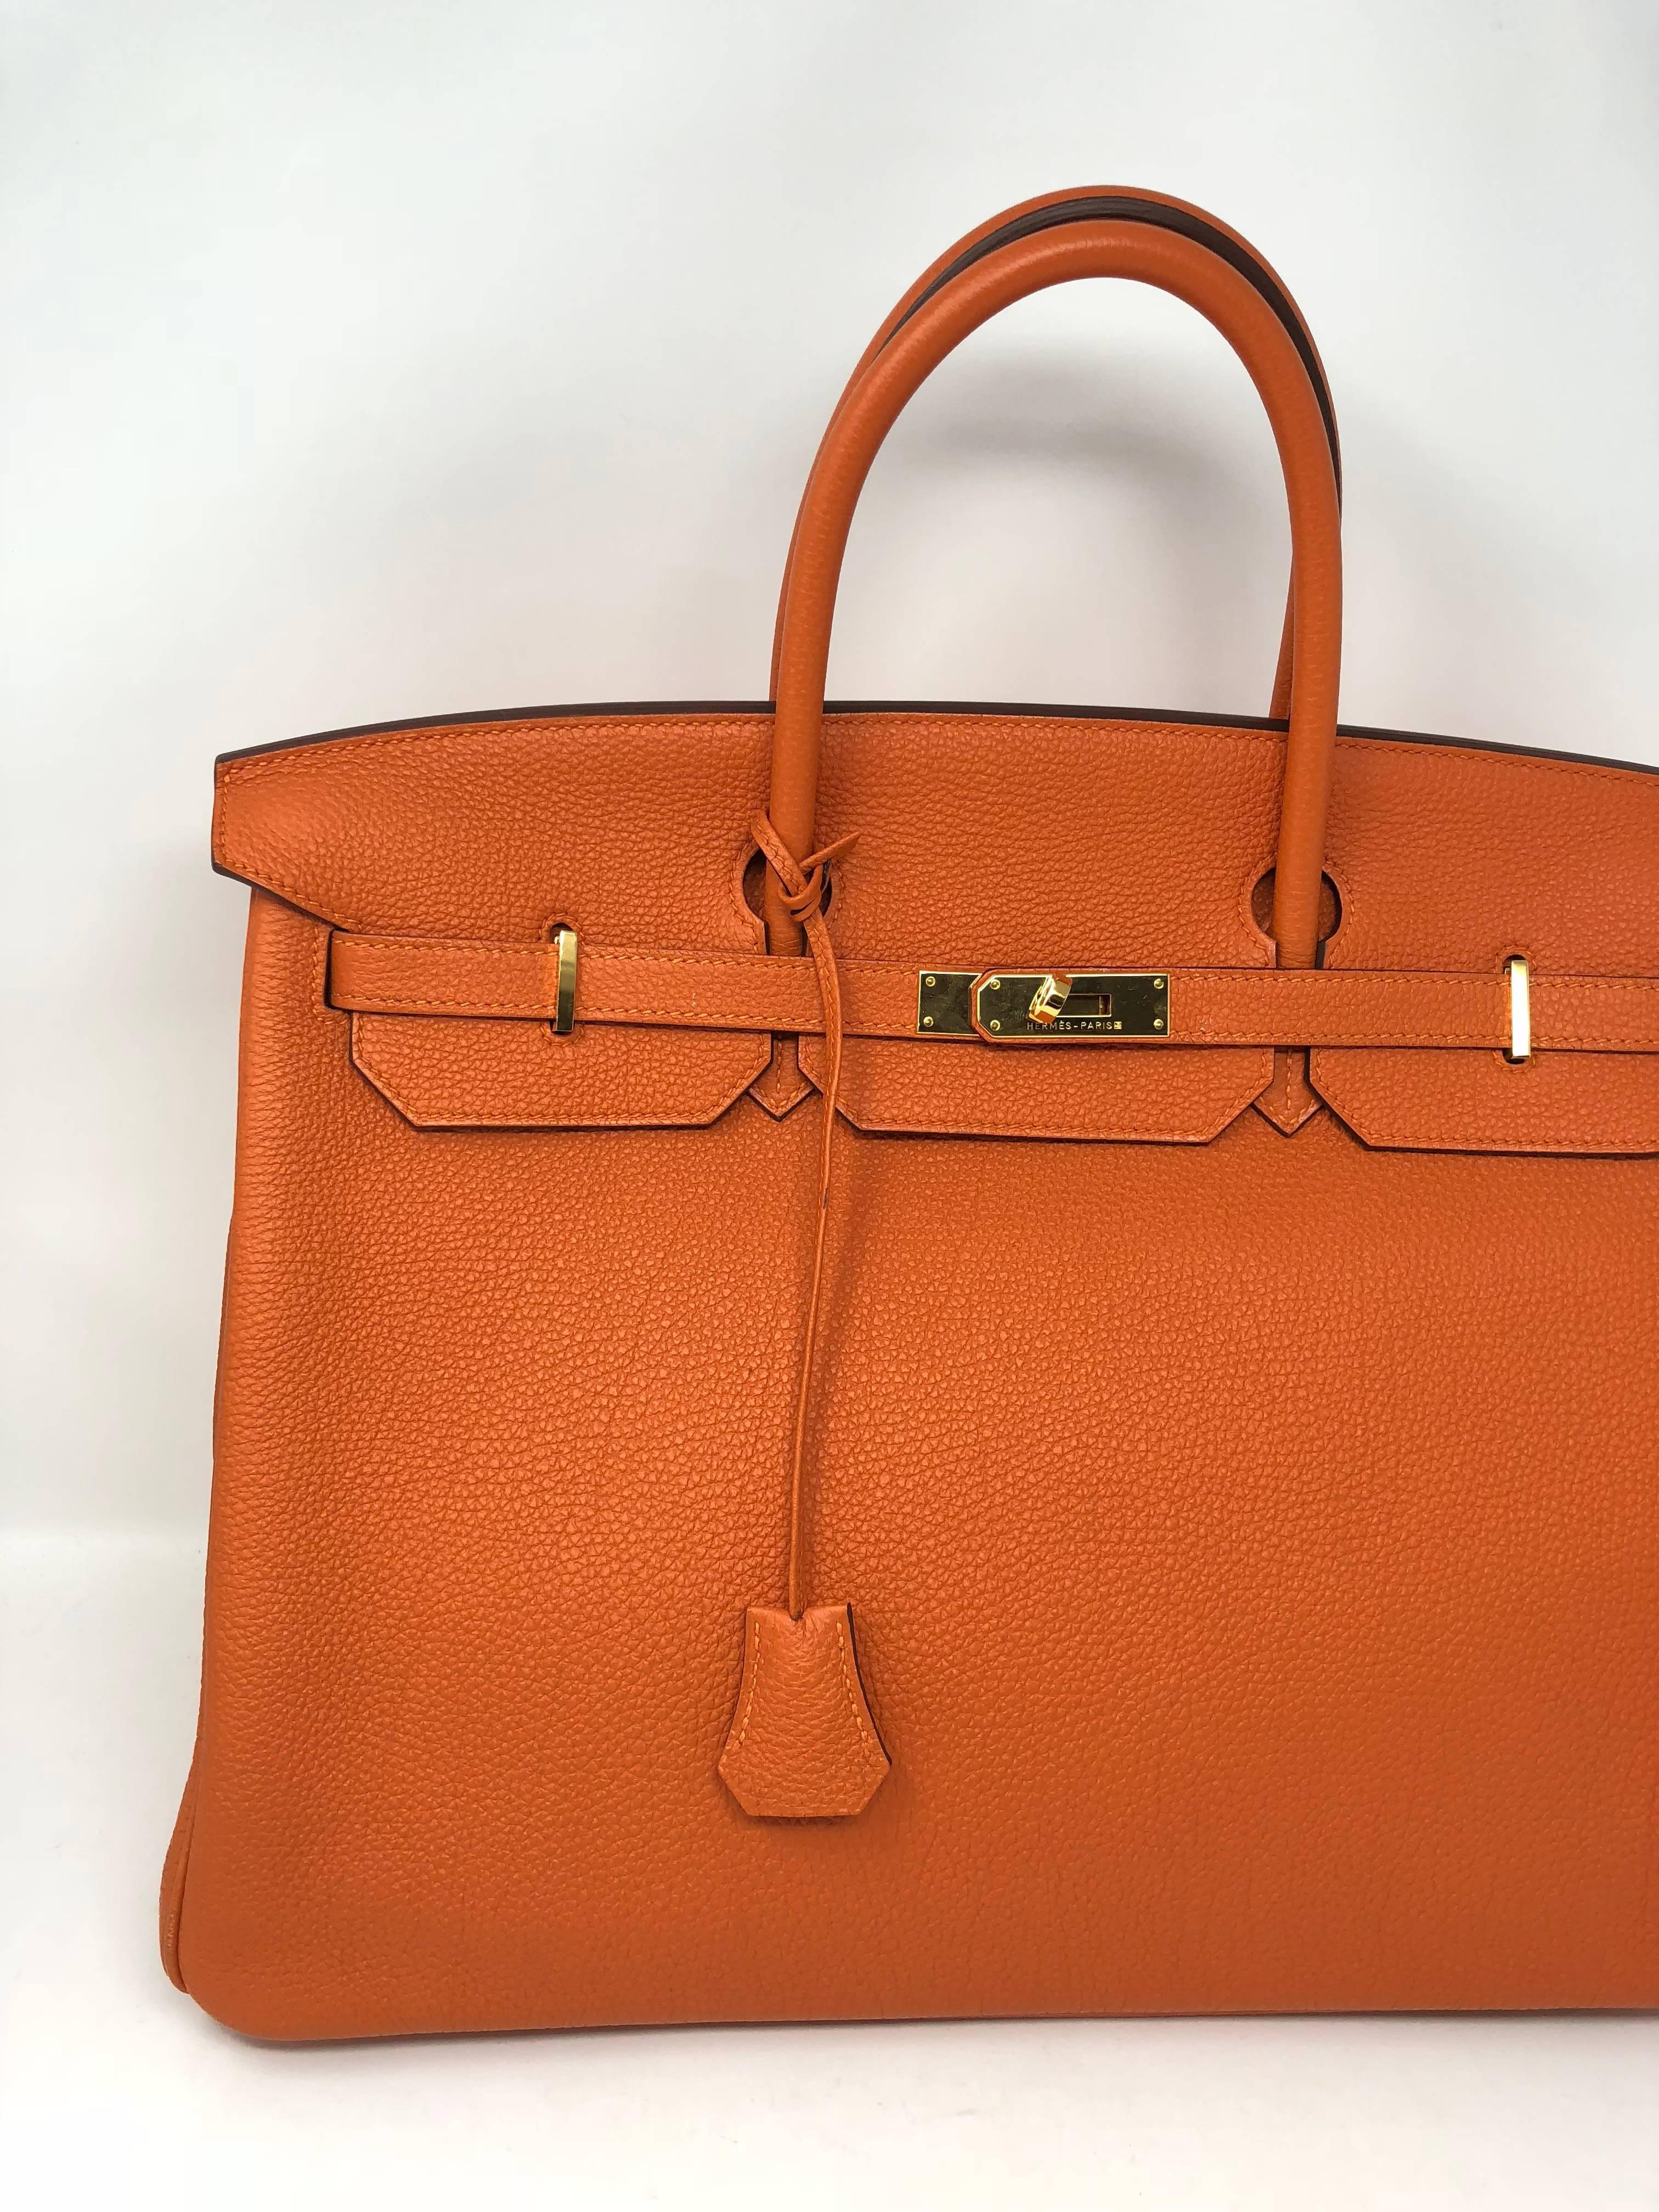 Hermes Birkin 40 Orange Togo with gold hardware. Like new condition. Clochette, keys and dust cover included. Guaranteed Authentic. 